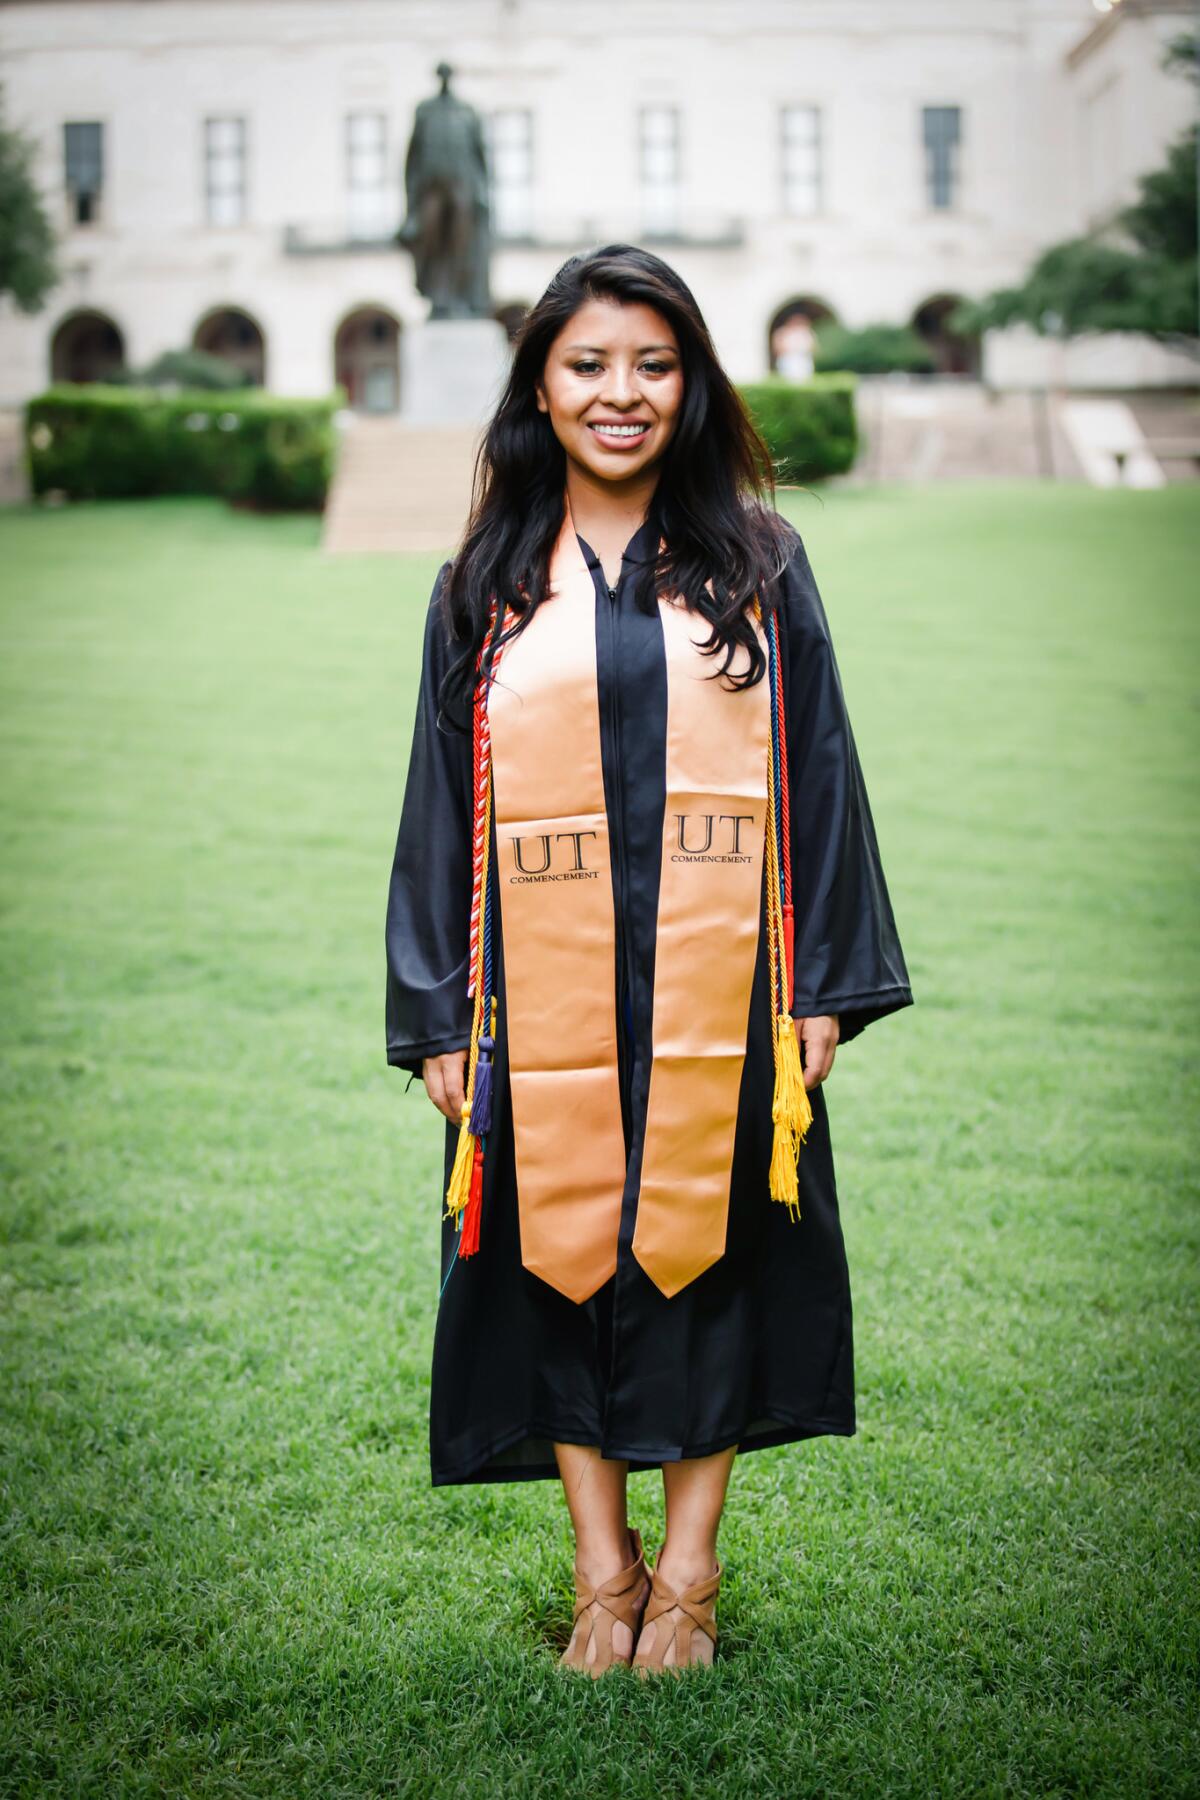 Lopez recently graduated from UT Austin with two majors.